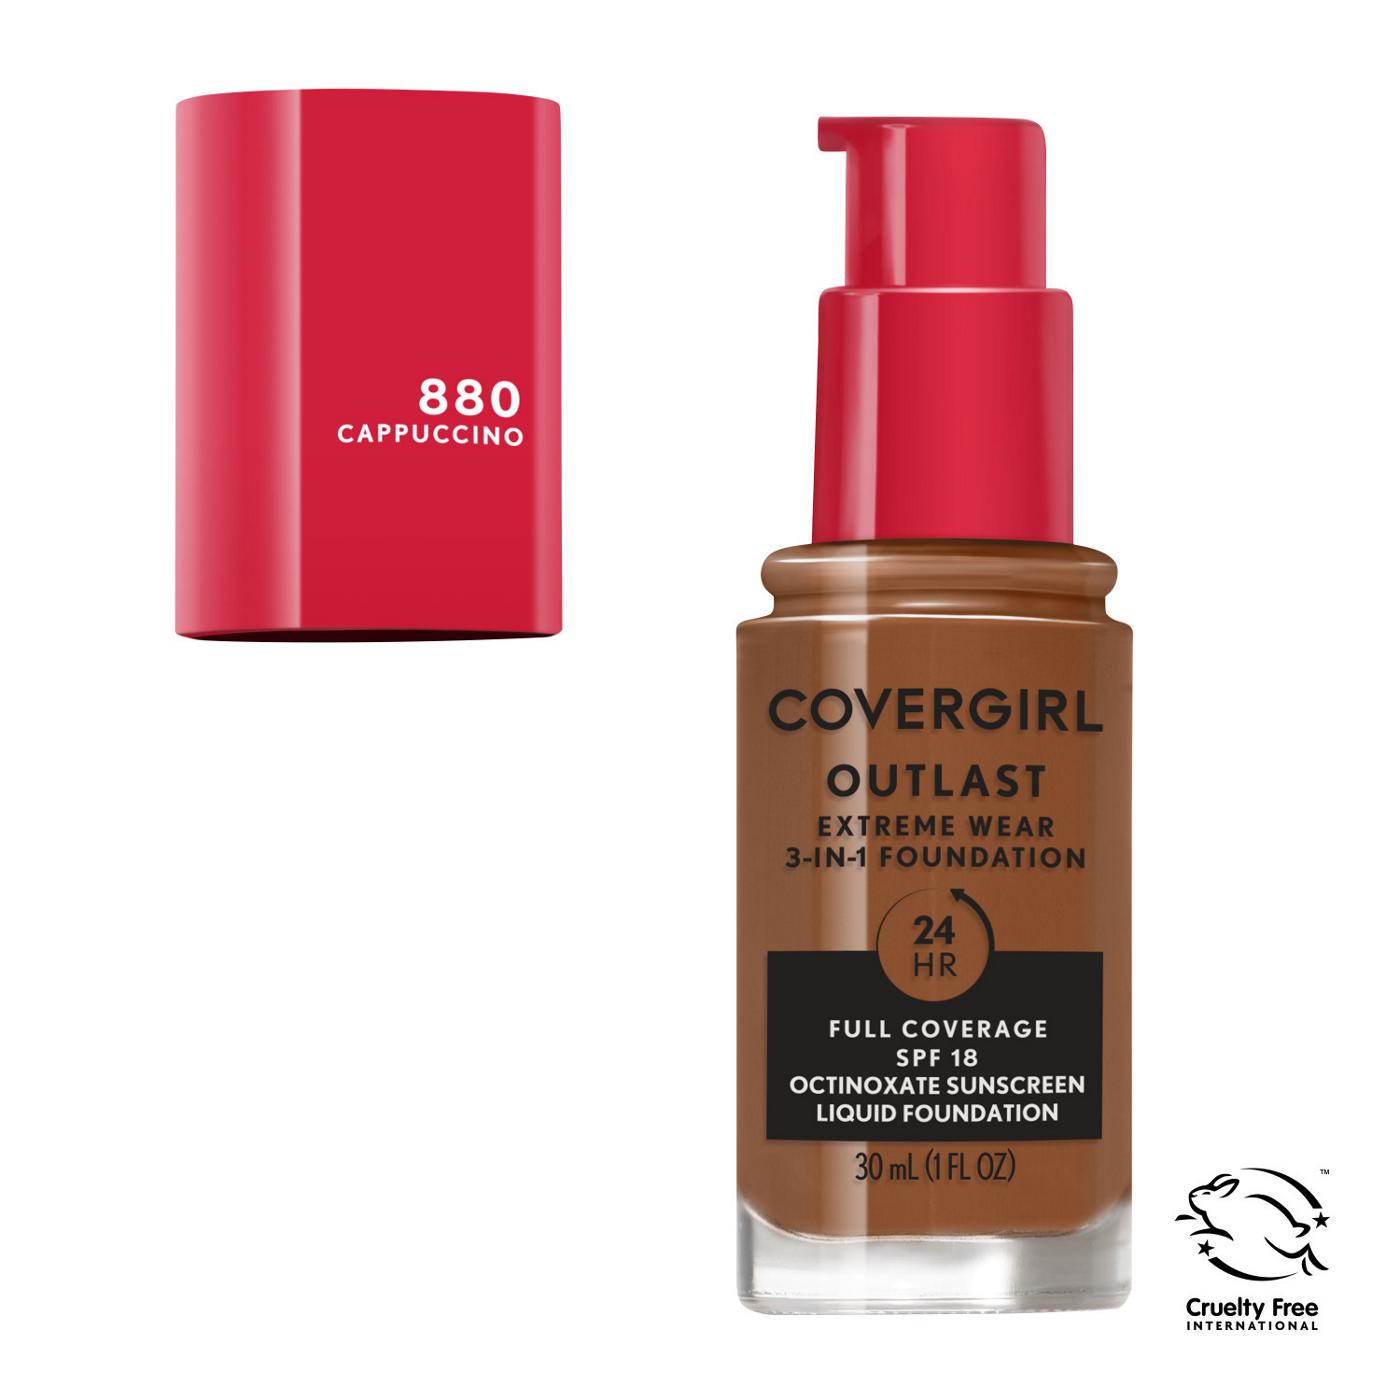 Covergirl Outlast Extreme Wear Liquid Foundation 880 Cappuccino; image 11 of 11